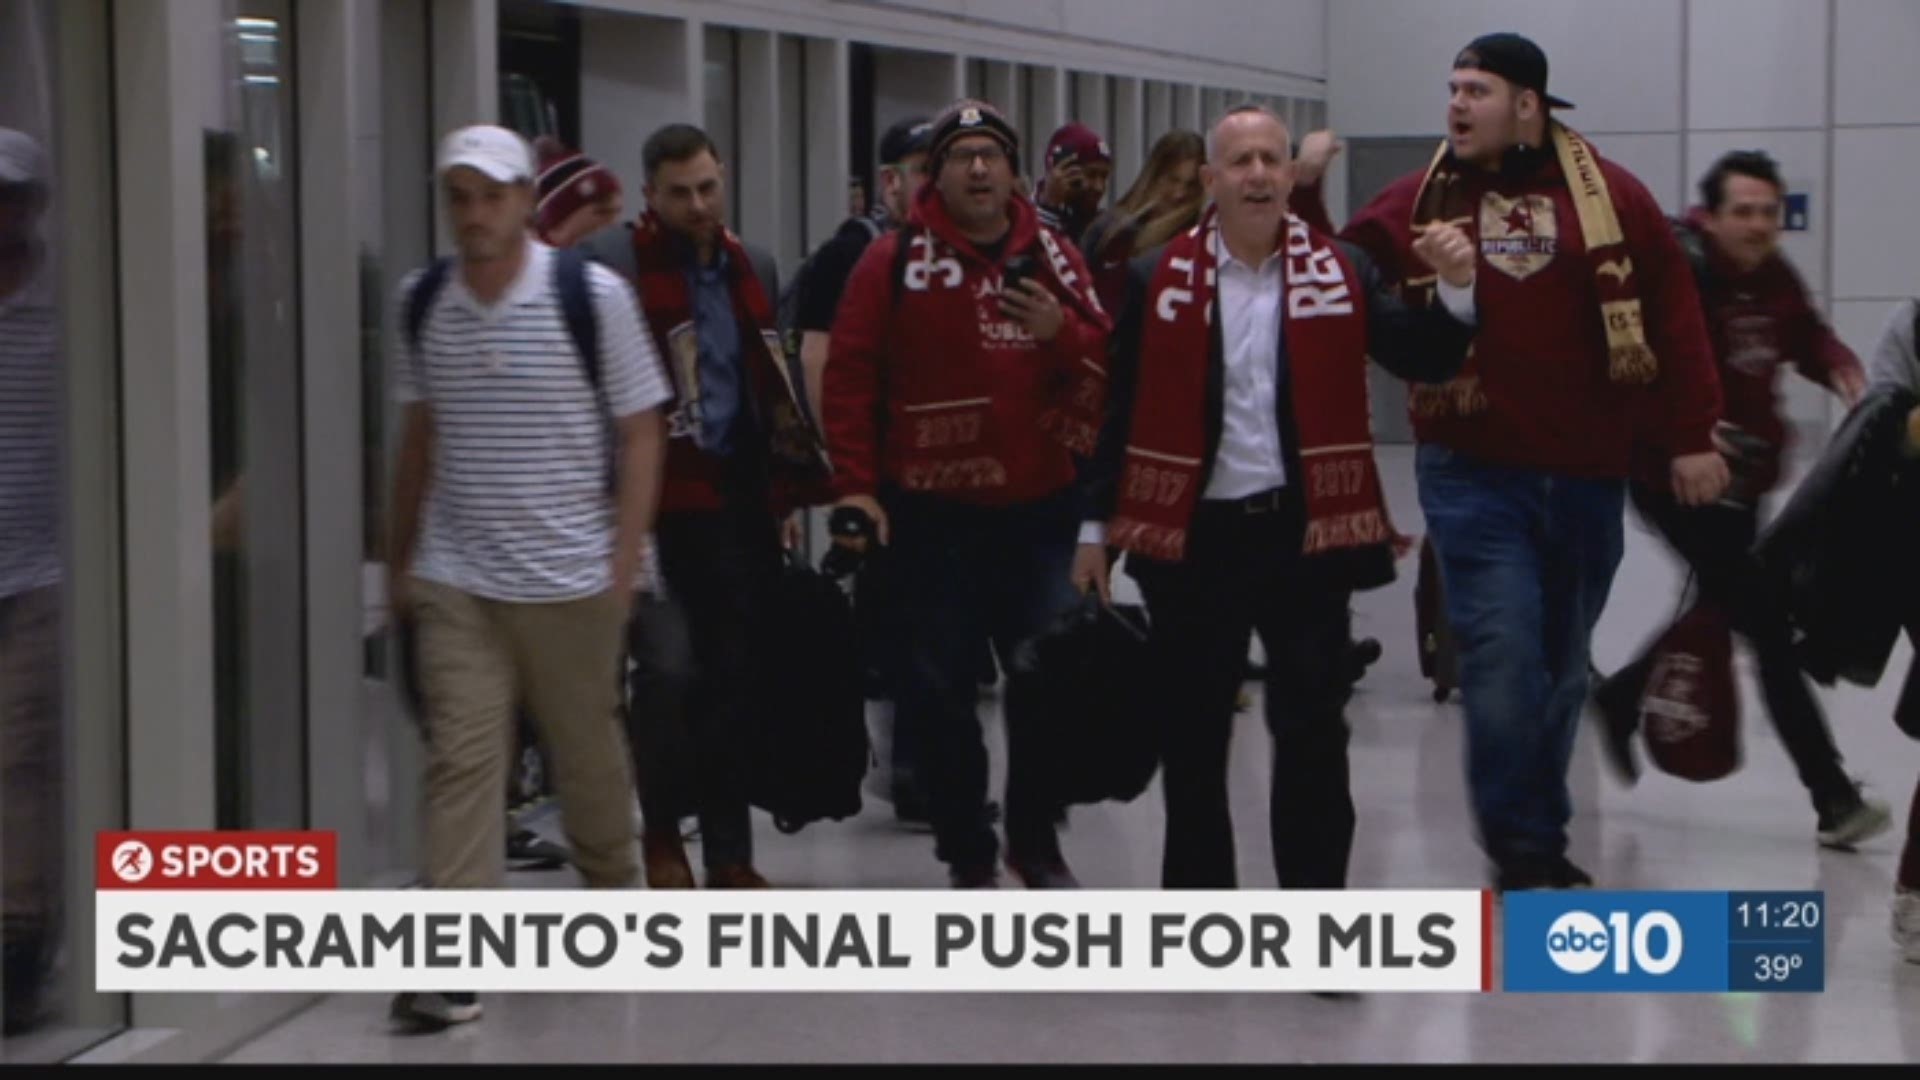 ABC10's Lina Washington examines Sacramento's proposal to Major League Soccer and lays out what's next in the process.